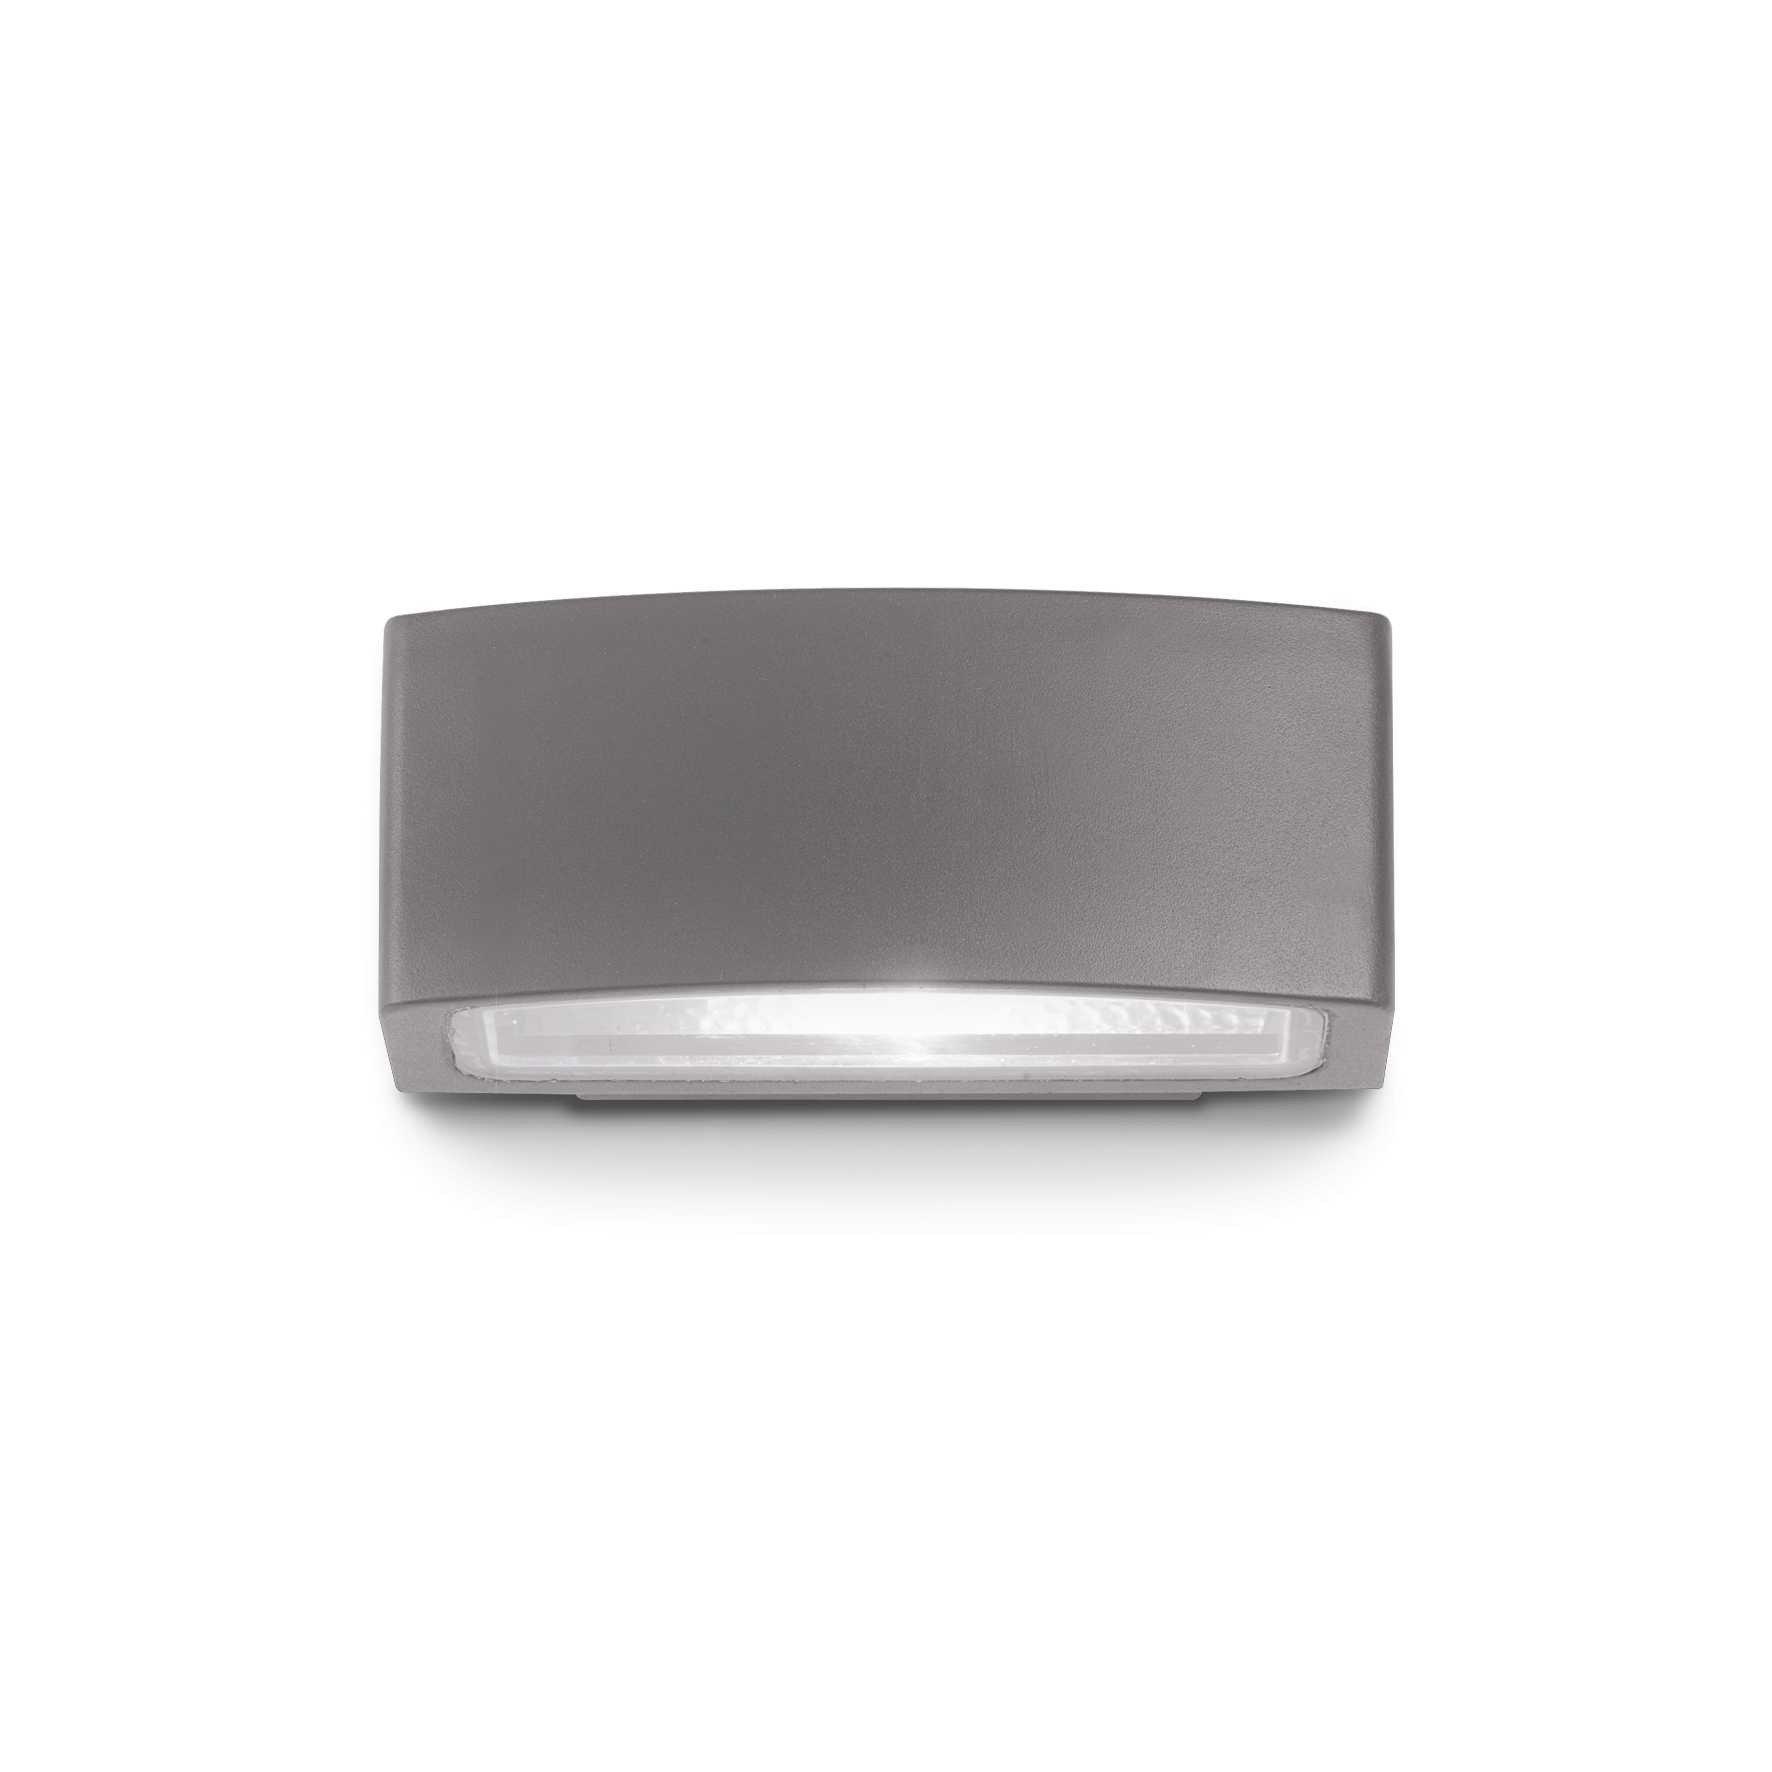 Andromeda 1 Light Outdoor Small Up Down Wall Light Polished Chrome Anthracite IP55 E27